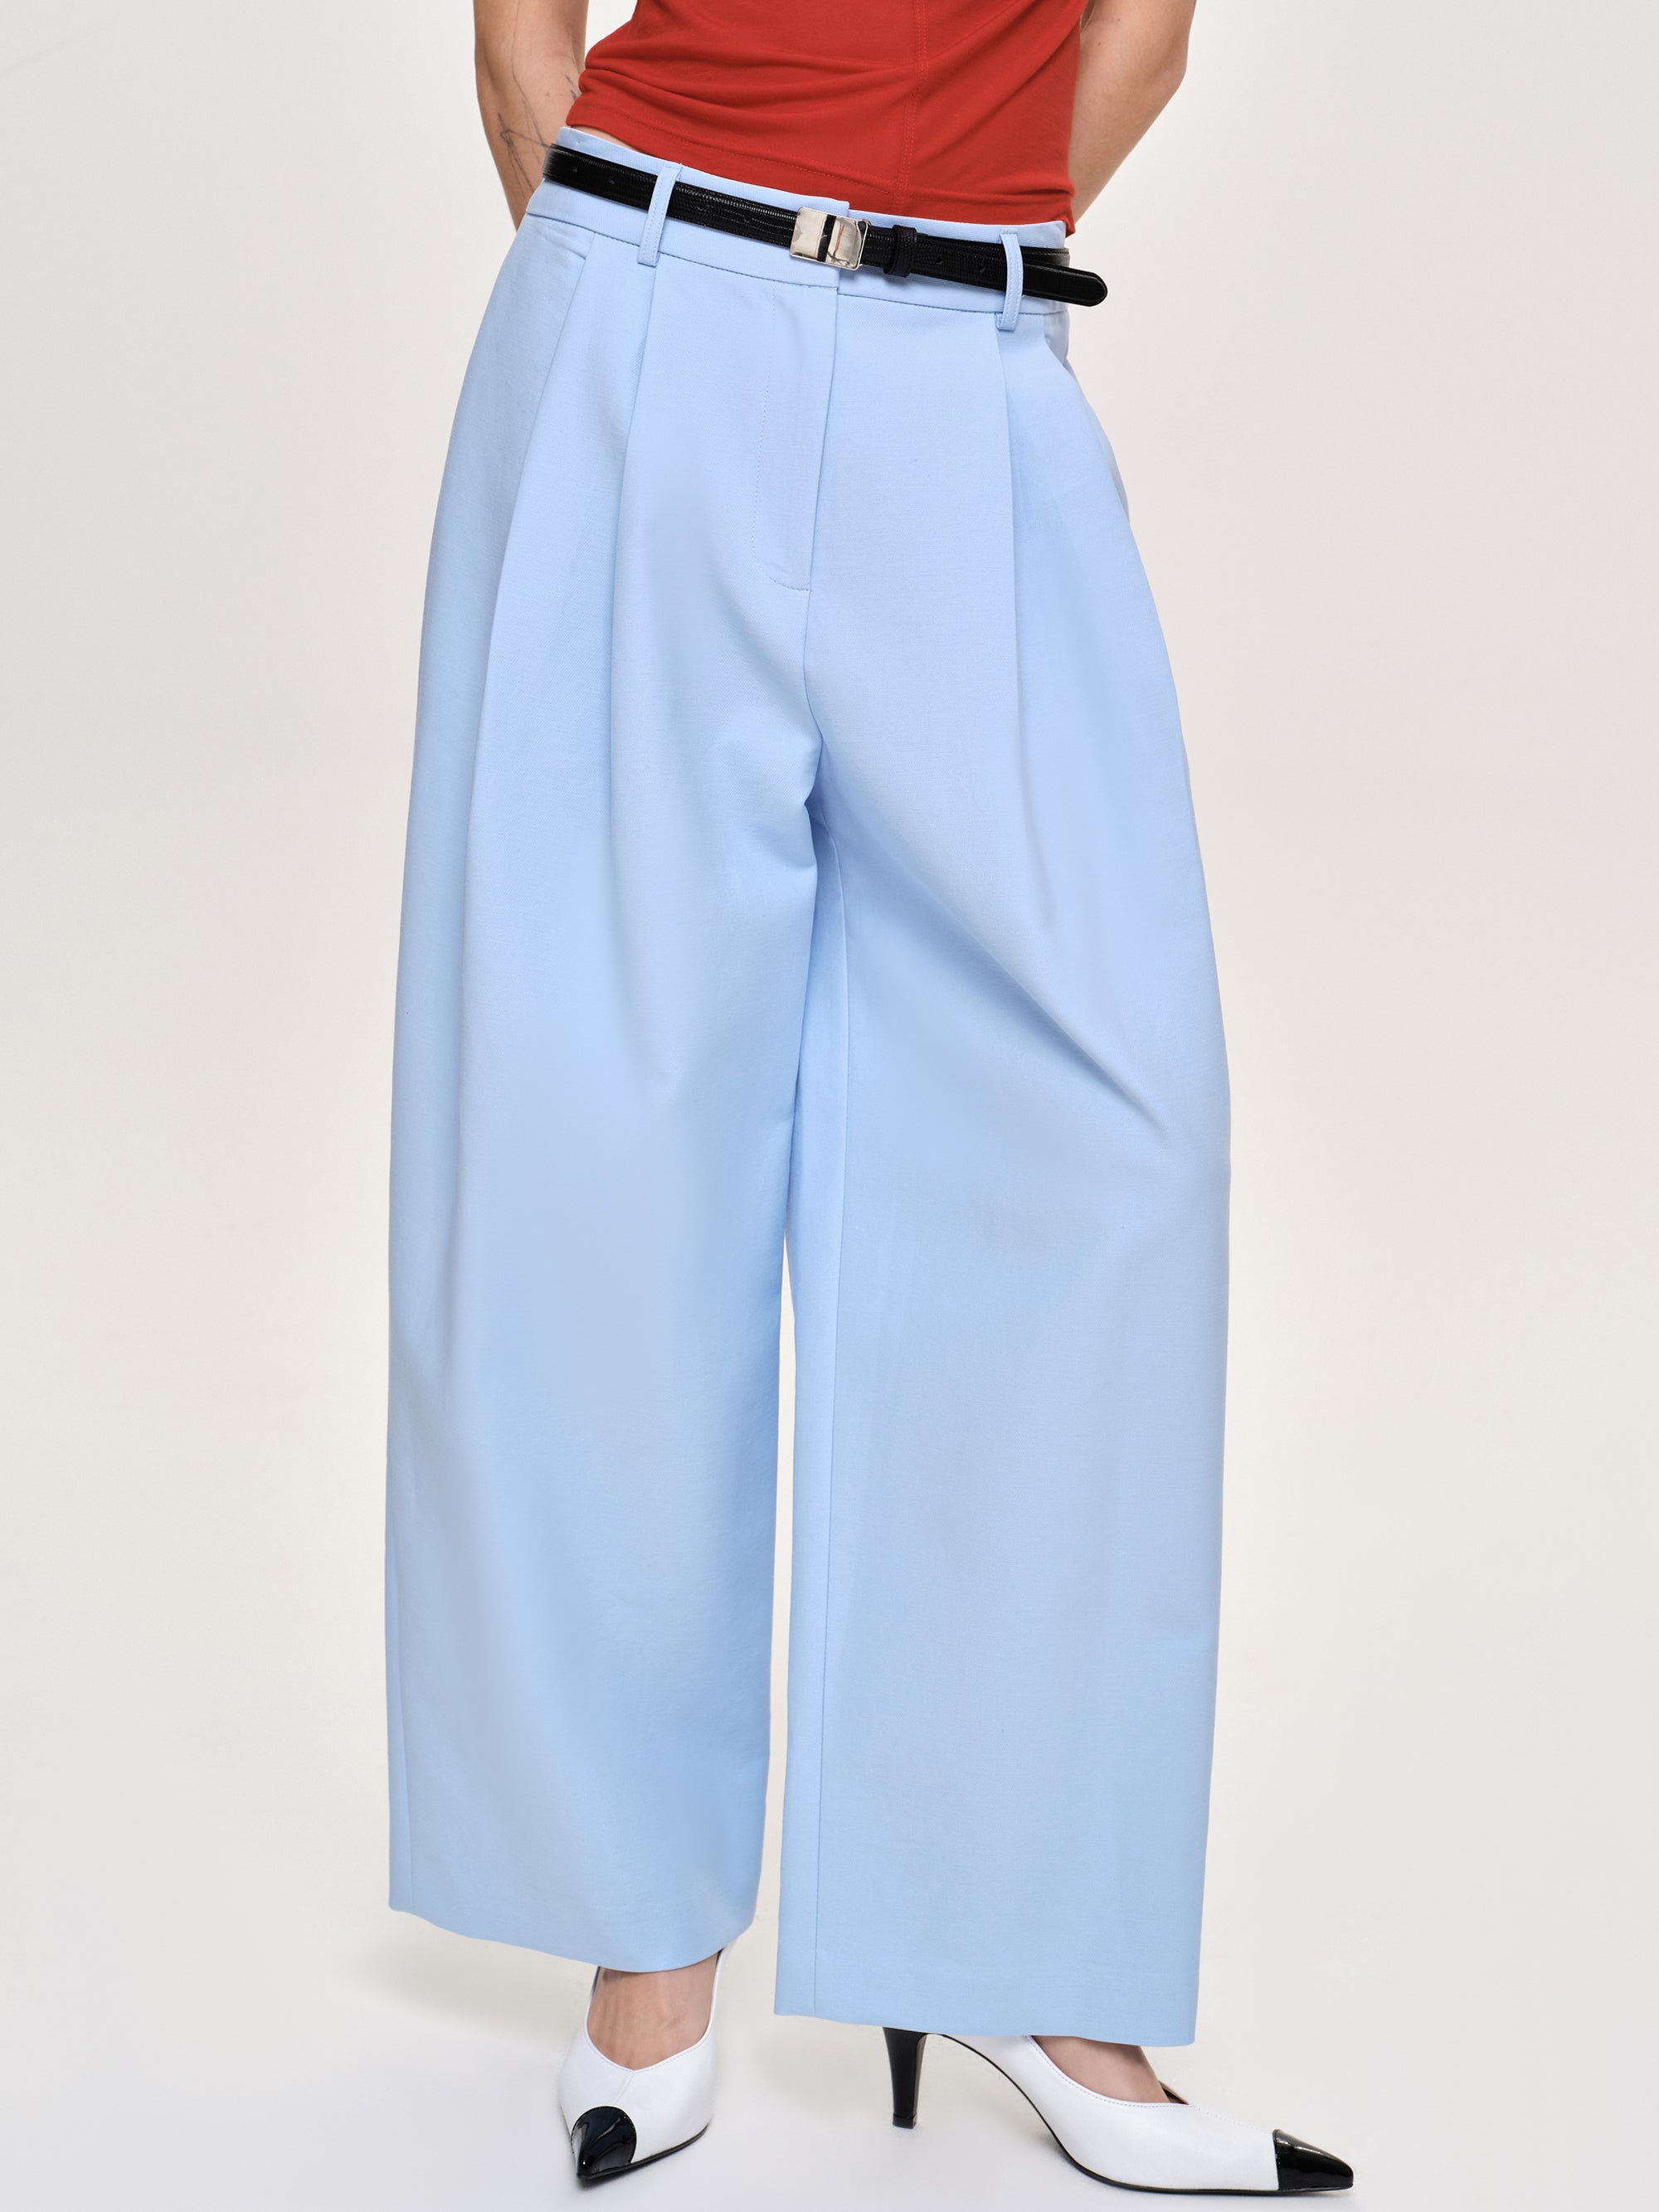 Juicy Couture co-ord velour track pants in ice blue | ASOS